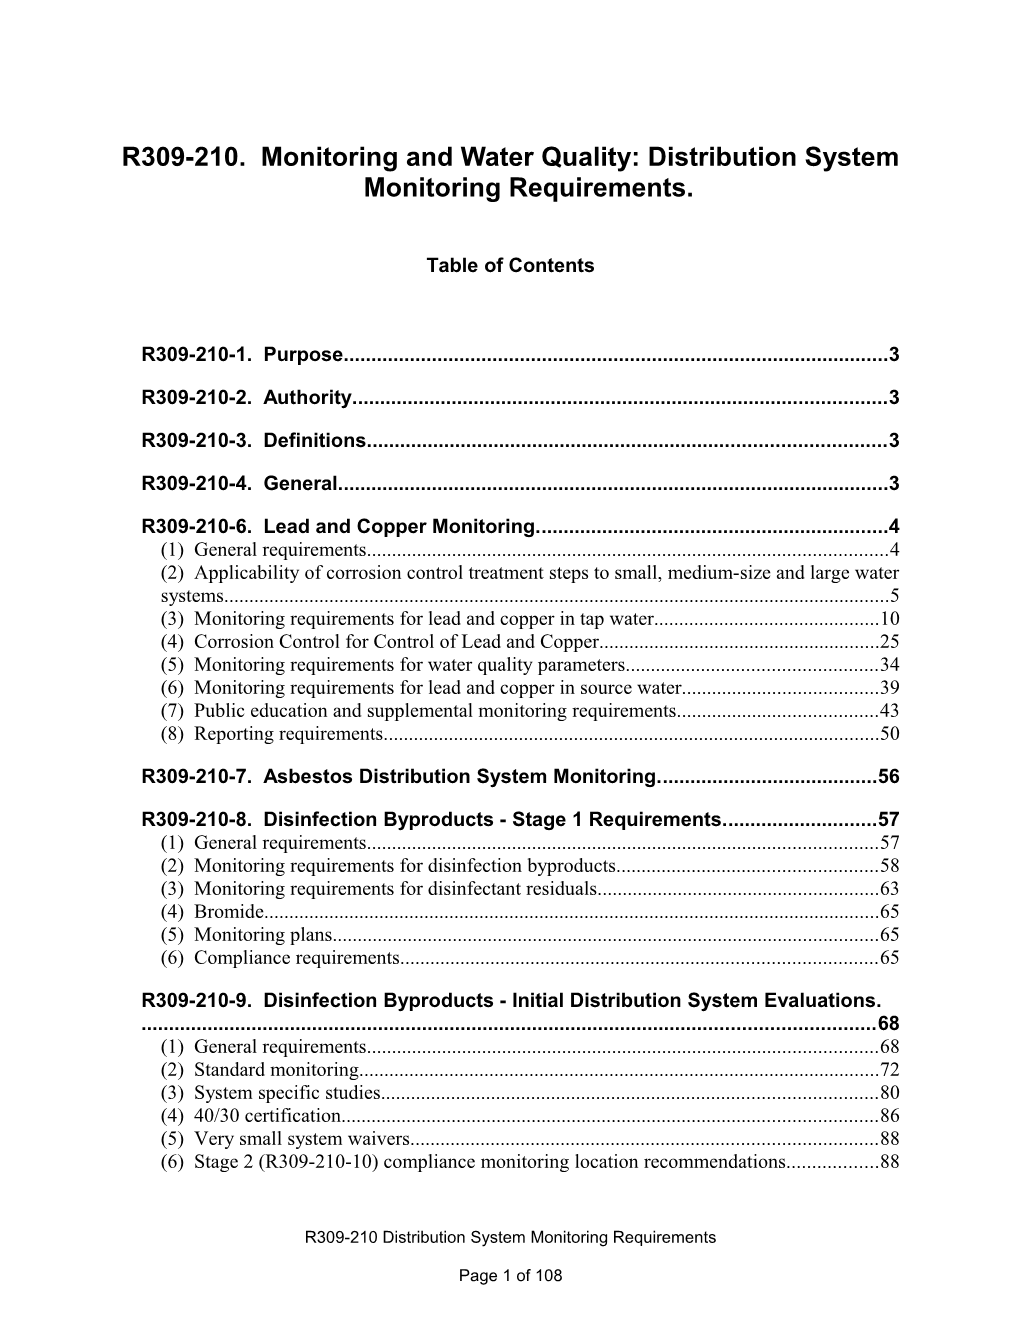 R309-210. Monitoring and Water Quality: Distribution System Monitoring Requirements